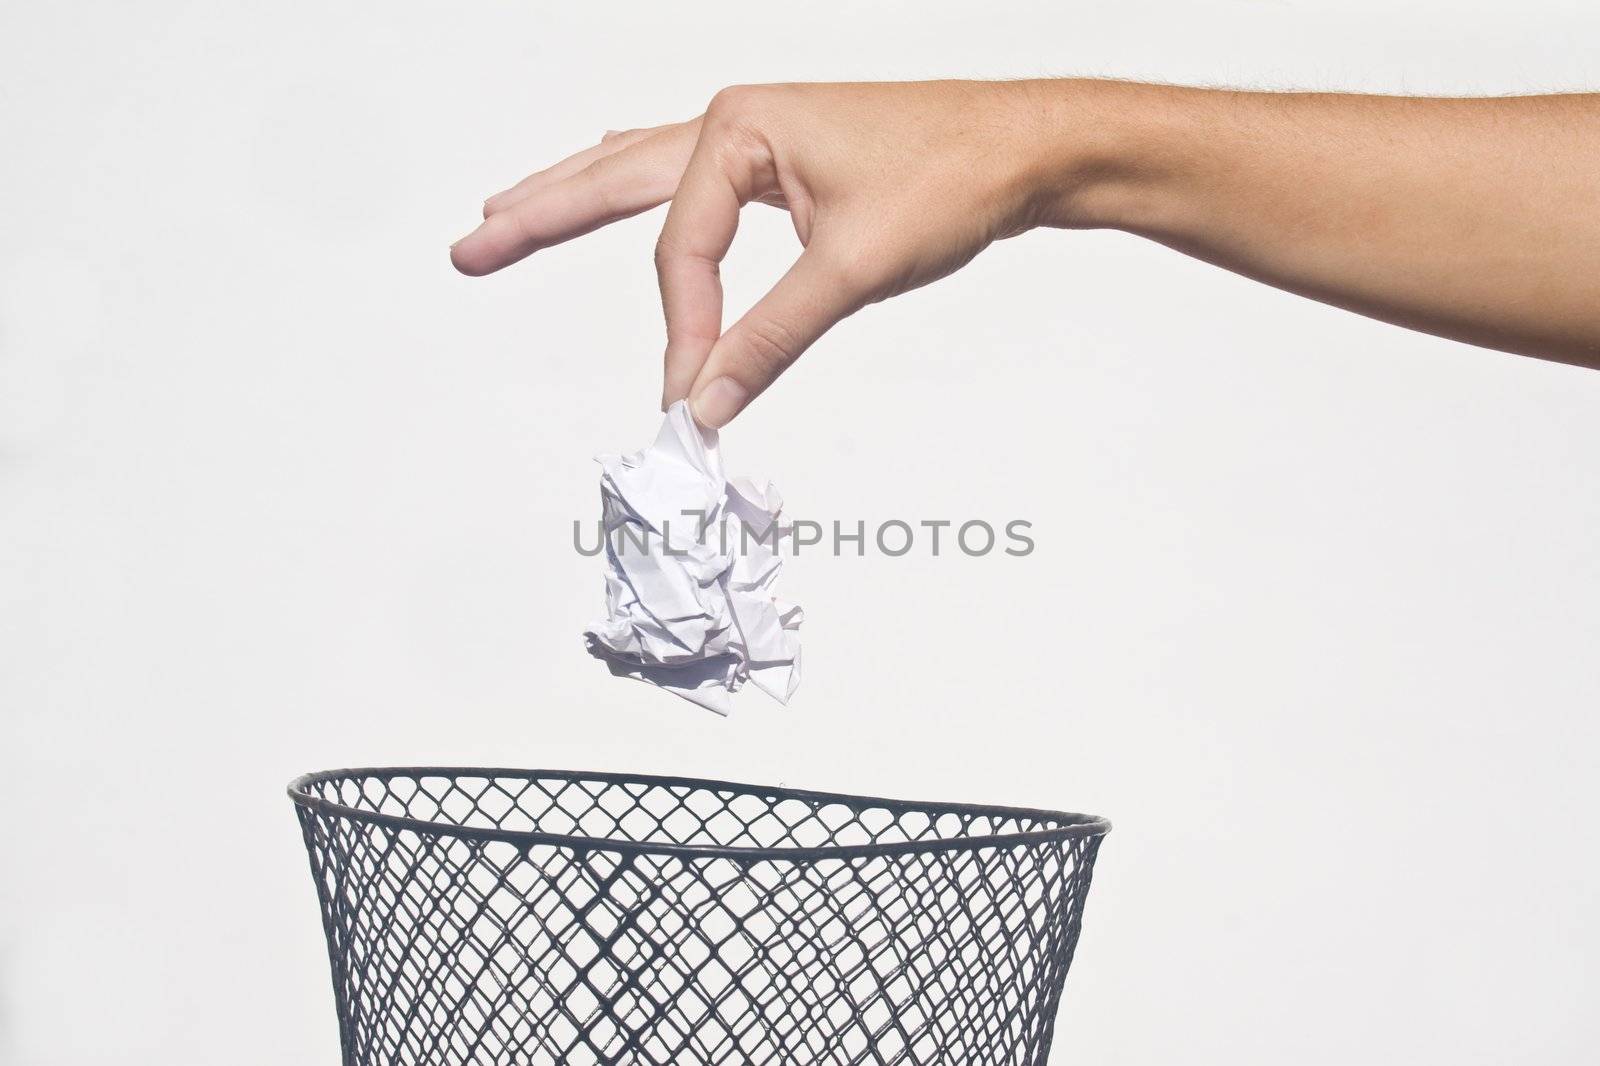 Detail of hand dropping crumpled paper in wire basket